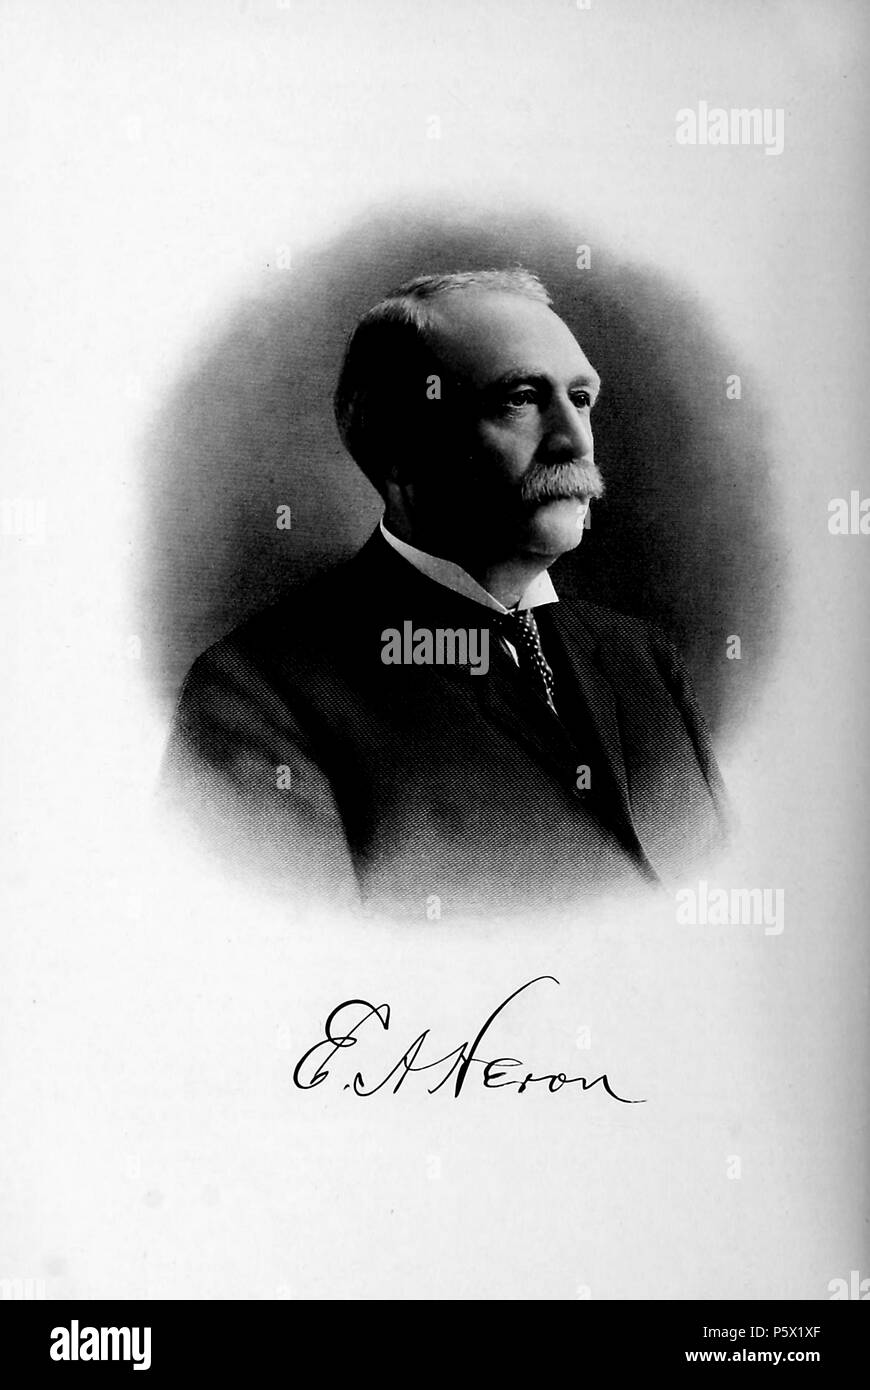 Black and white portrait photograph of the president of the Oakland Traction Company, Ernest A Heron, shown in three-quarter profile view, from the chest up, with a serious expression on his face, a neatly groomed mustache, and wearing a dark suit and polka dotted tie, from the volume 'History of the State of California and Biographical Record of Oakland and Environs, ' authored by JM (James Miller) Guinn, and published in Los Angeles by the Historic Record Co, 1907. Courtesy Internet Archive. () Stock Photo